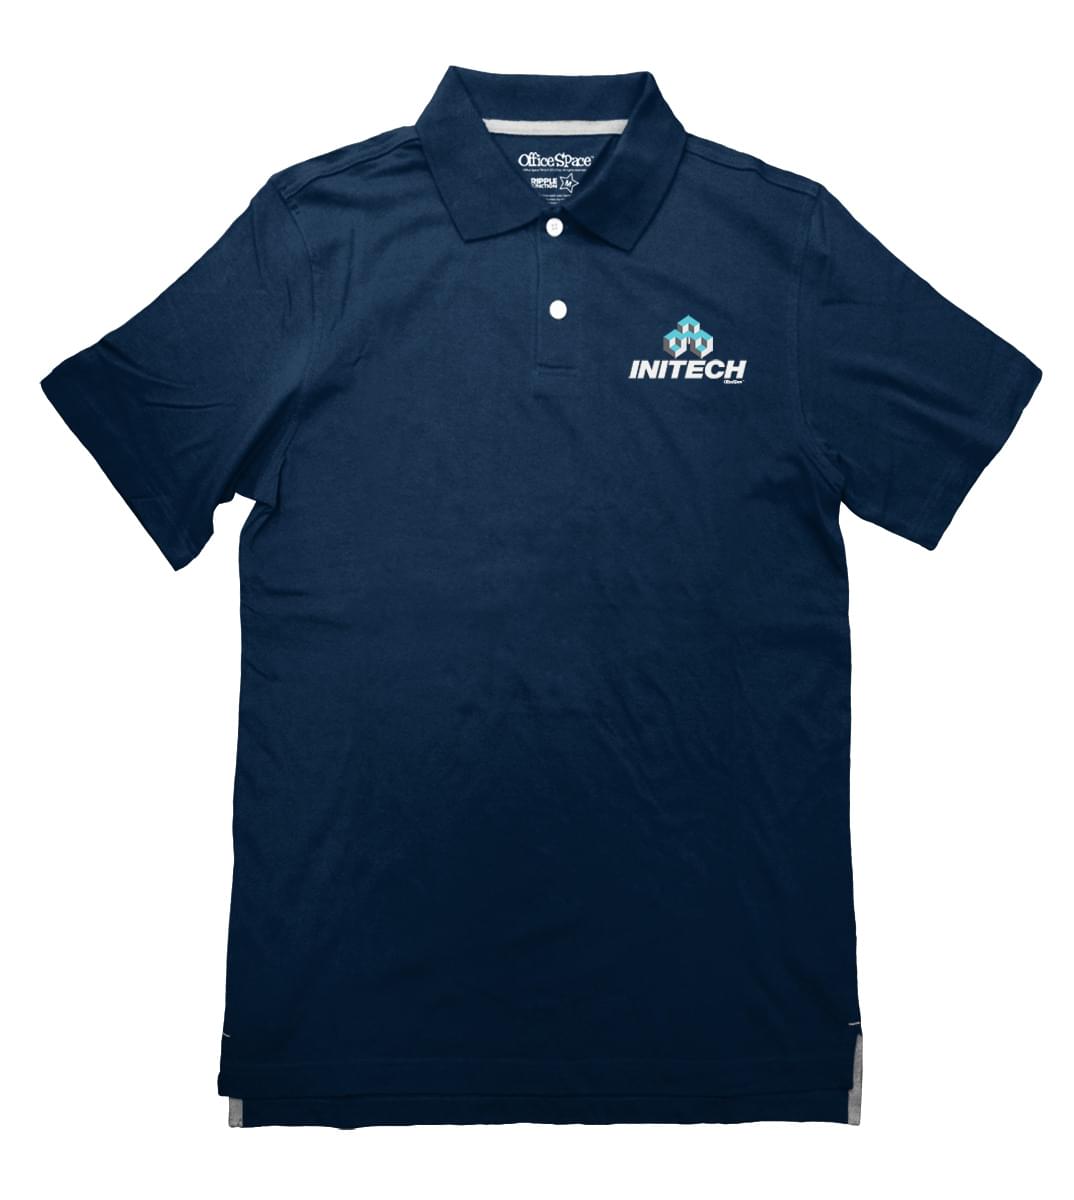 Office Space Initech Adult Polo Shirt | Free Shipping